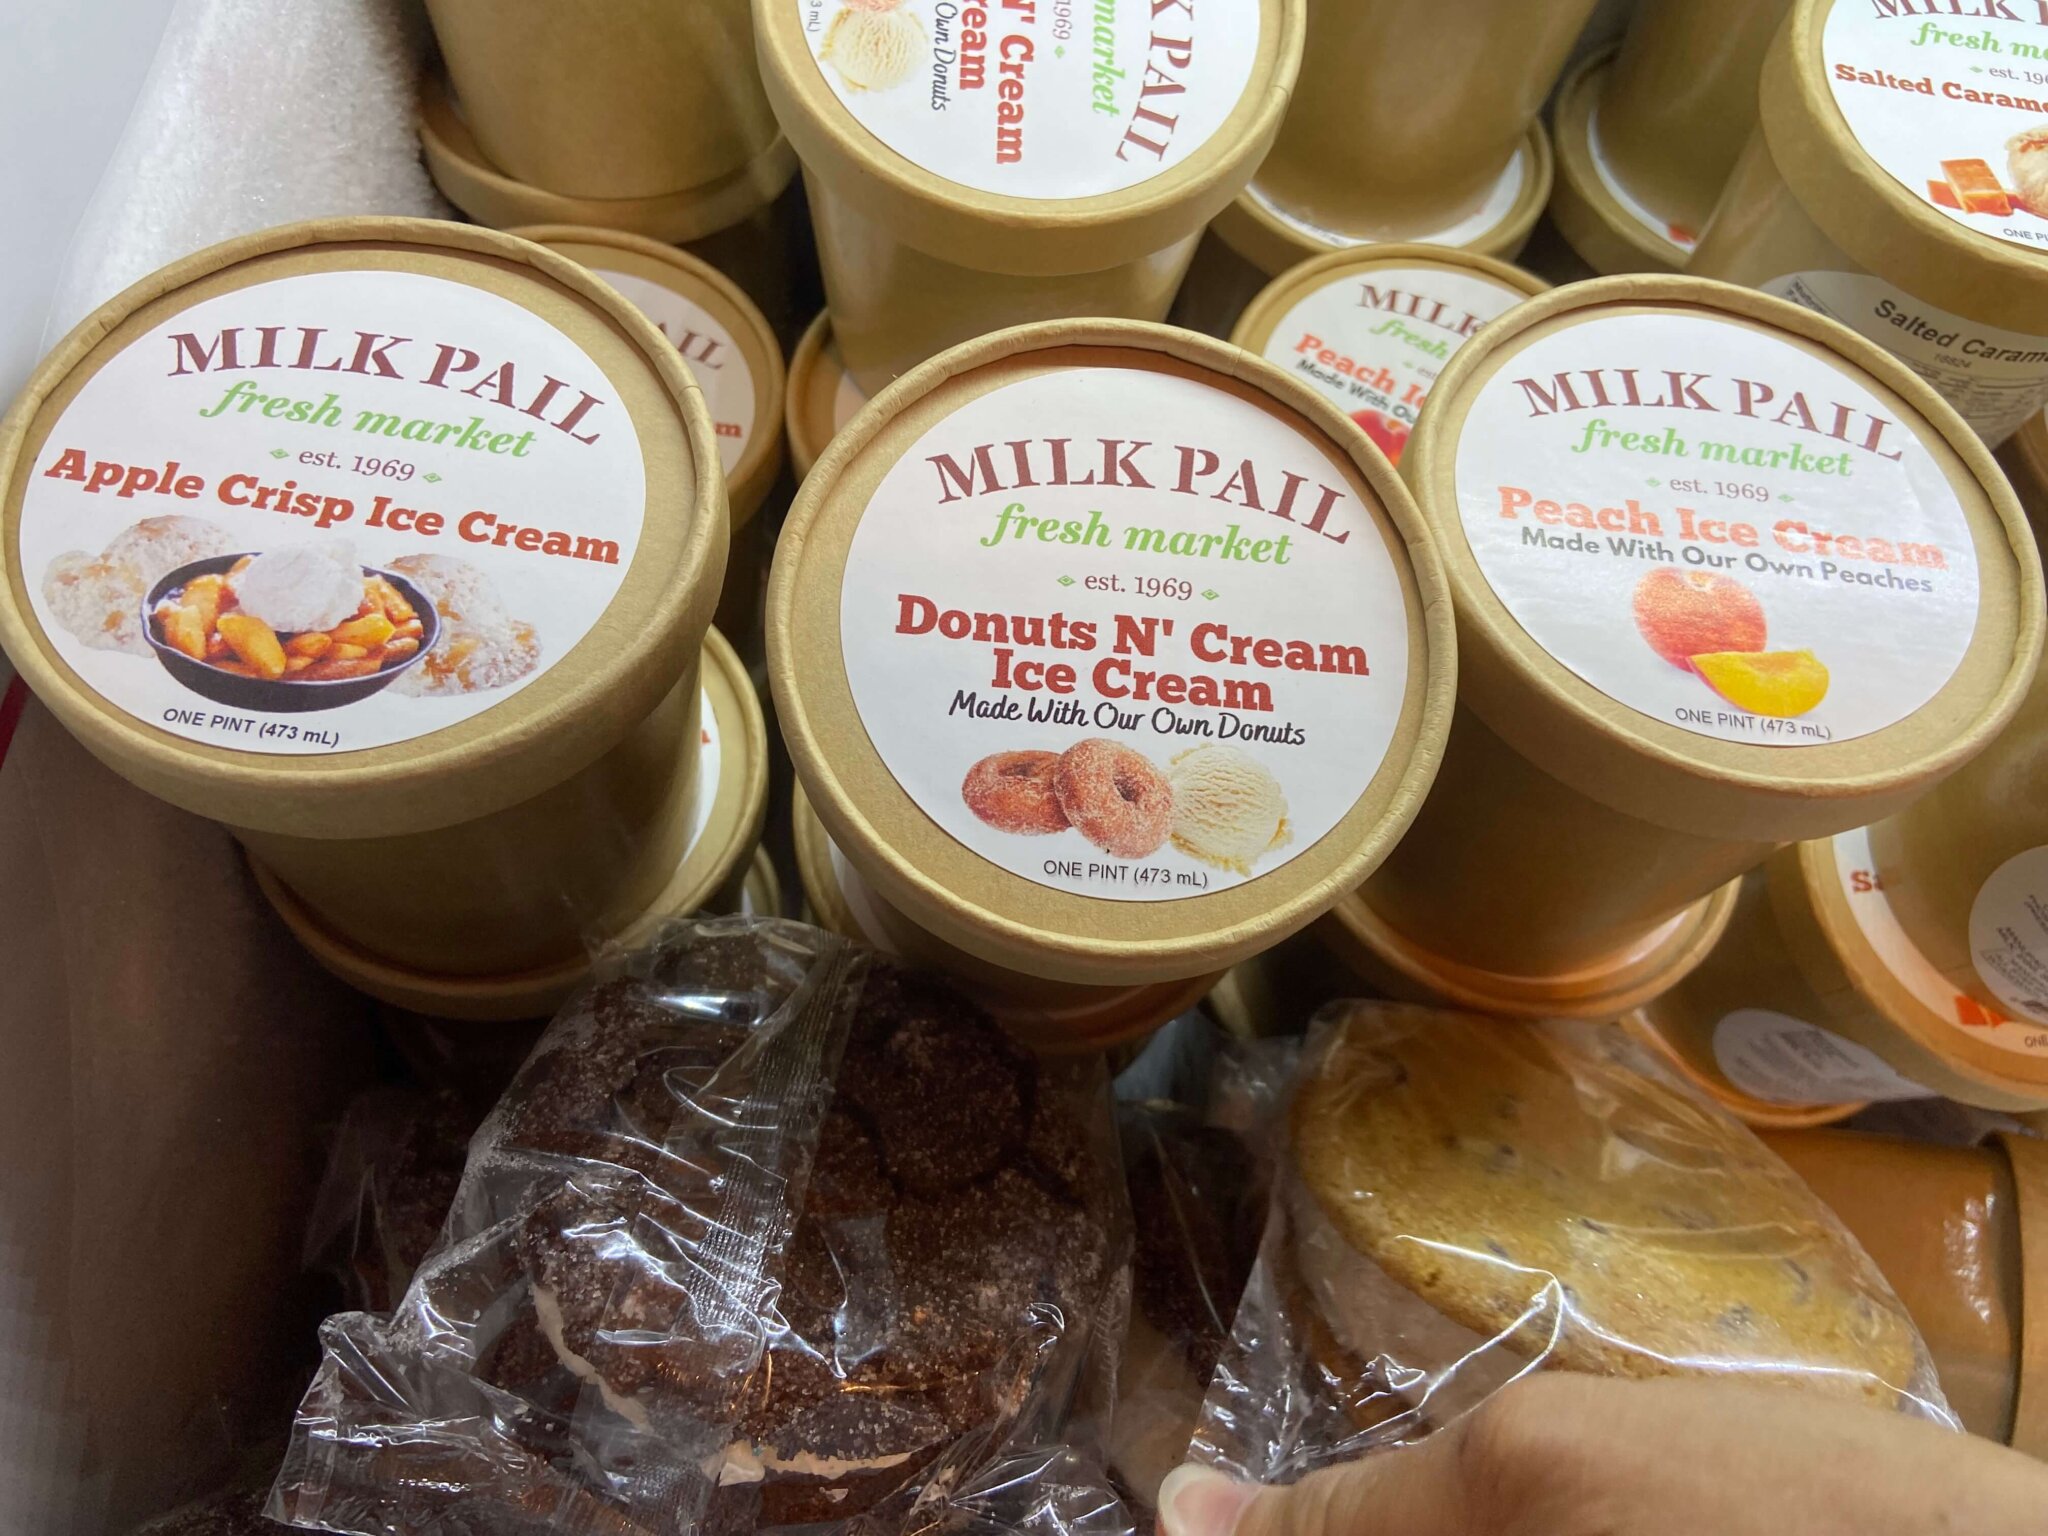 Apple cider donut flavored ice cream from Milk Pail